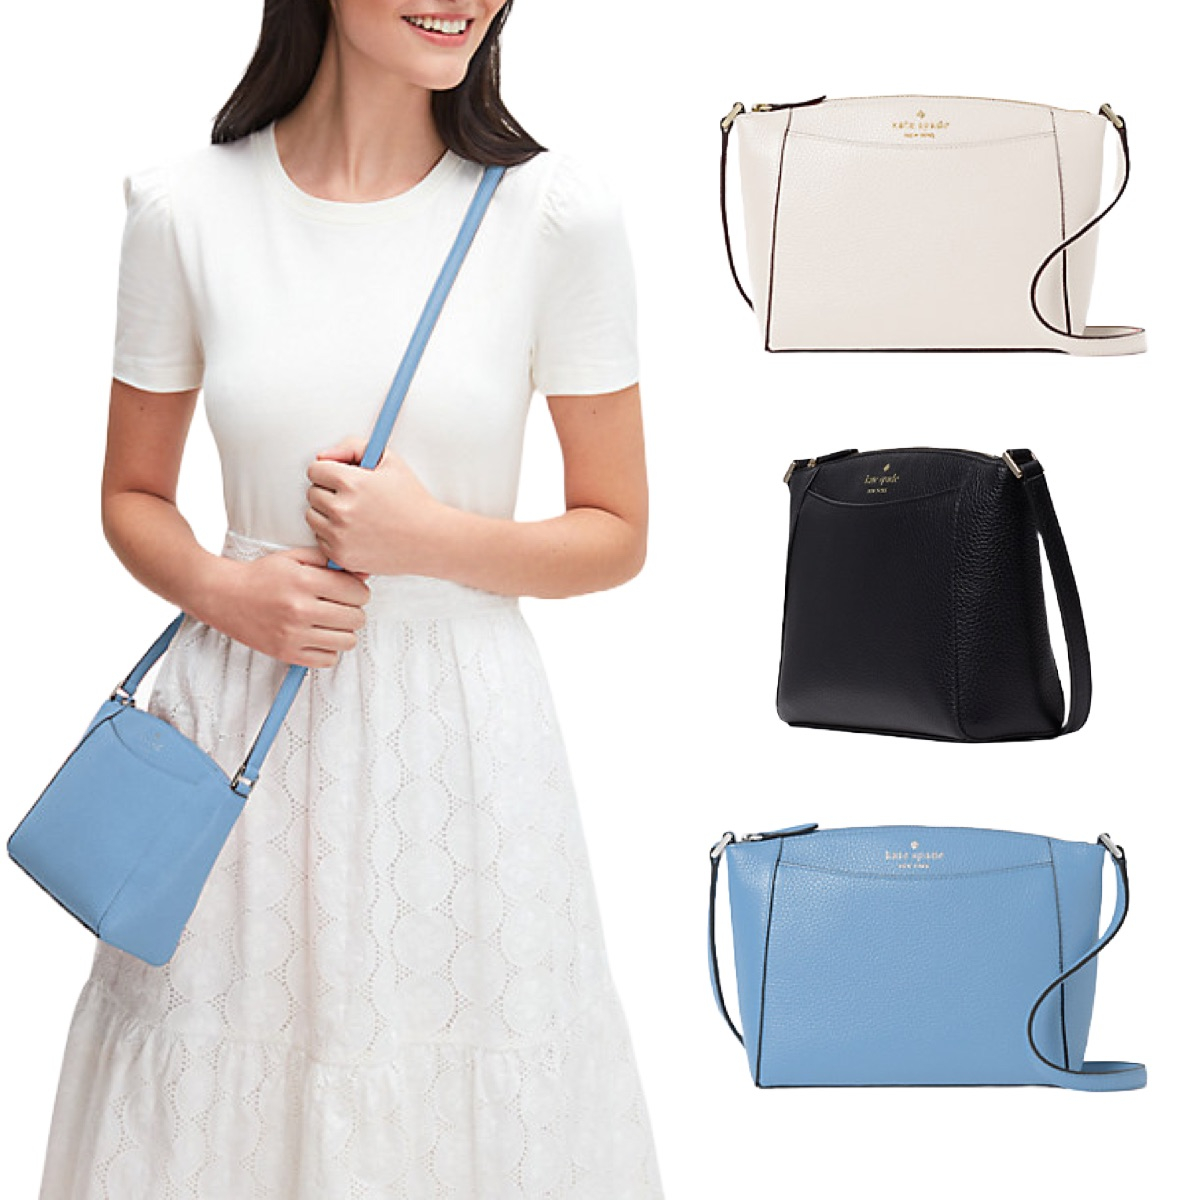 Top 33+ imagen kate spade $59 today only